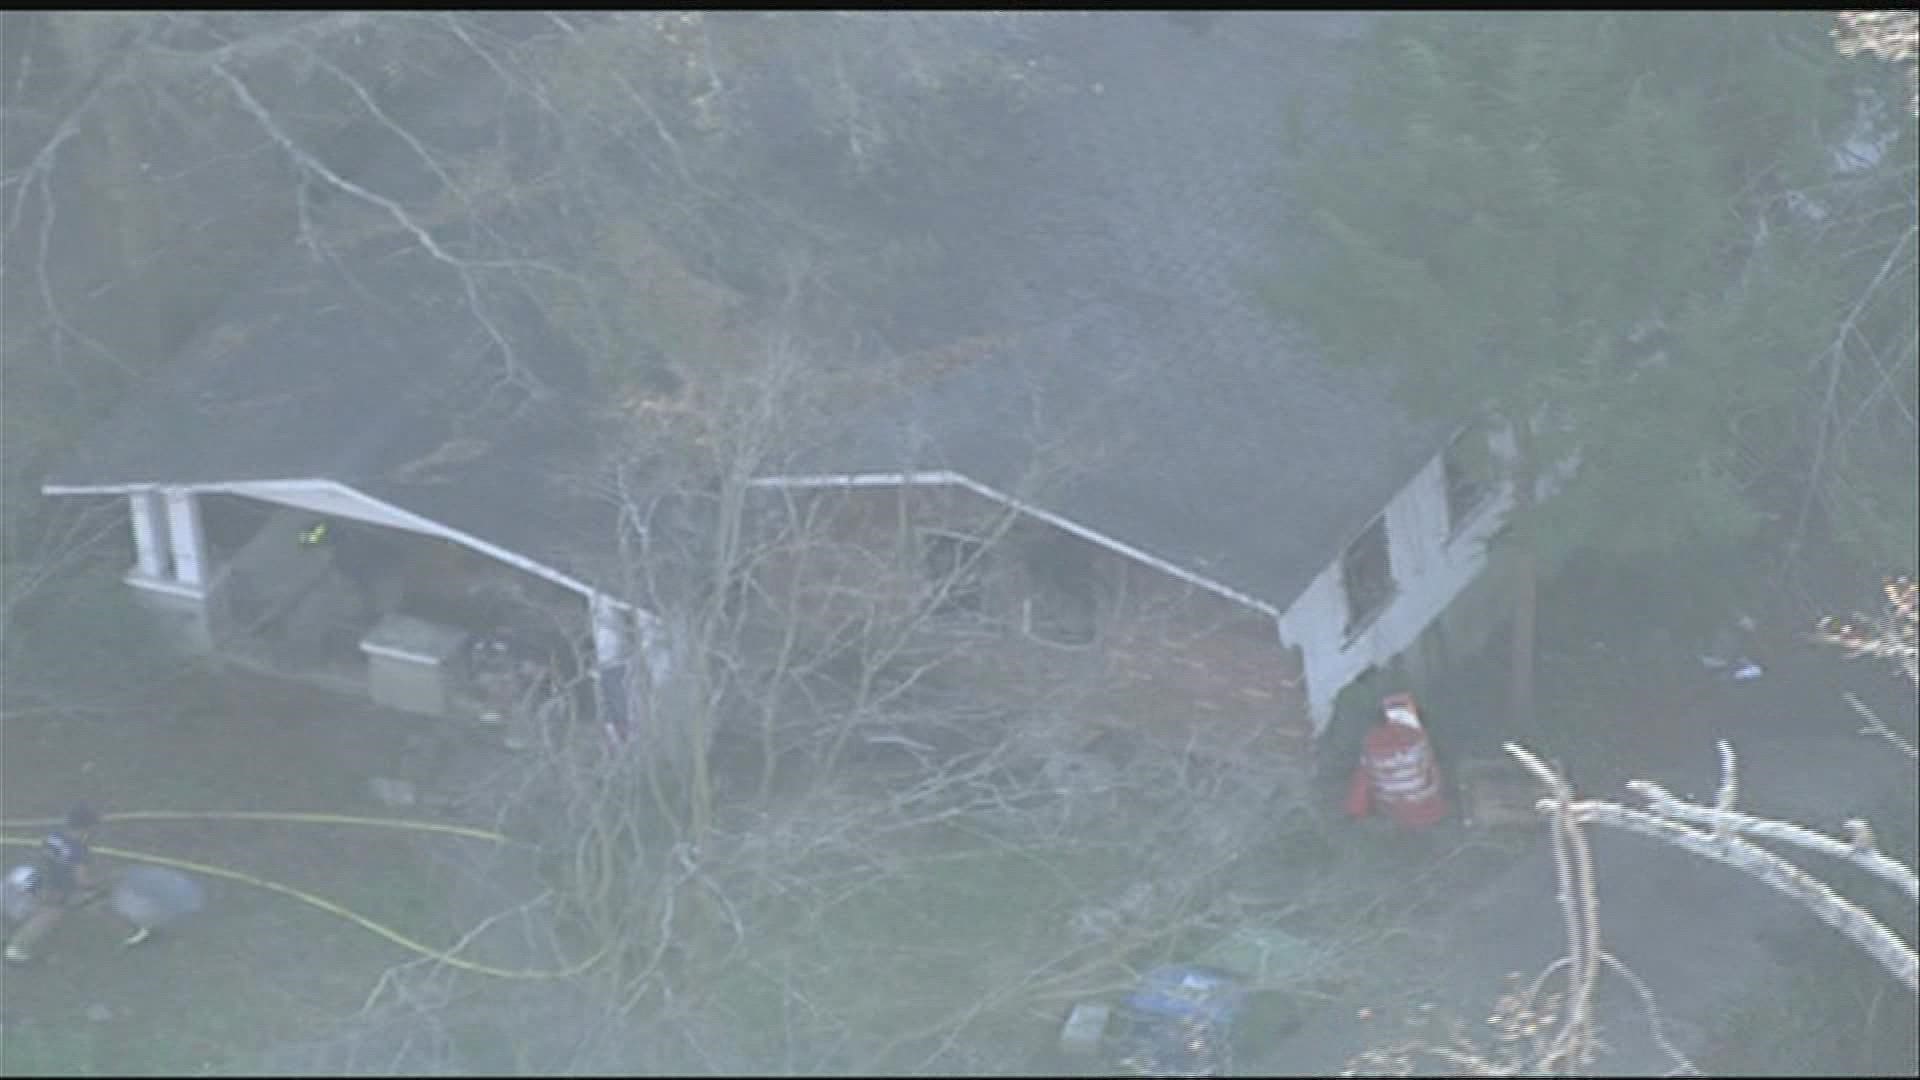 11Alive Skytracker flew over the home where the fire does not appear to be extensive on the outside of the home.